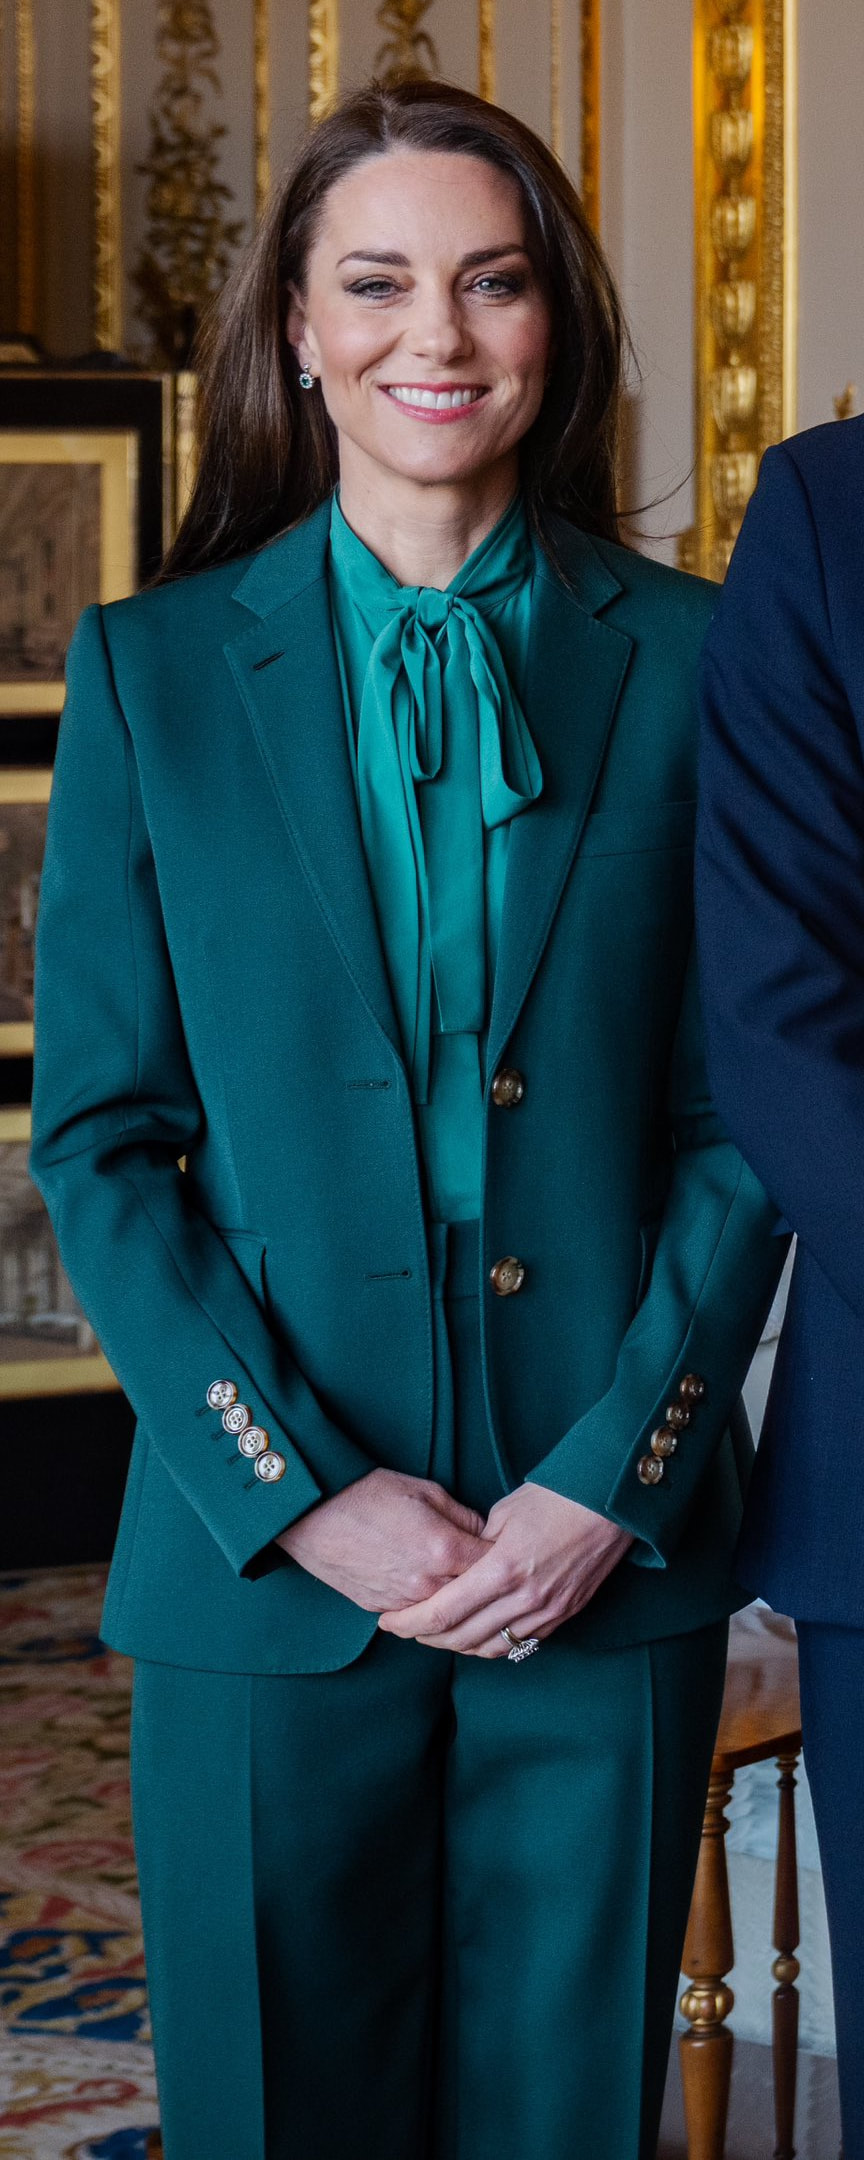 Burberry Tailored Blazer in Green as seen on Kate Middleton, Princess of Wales.